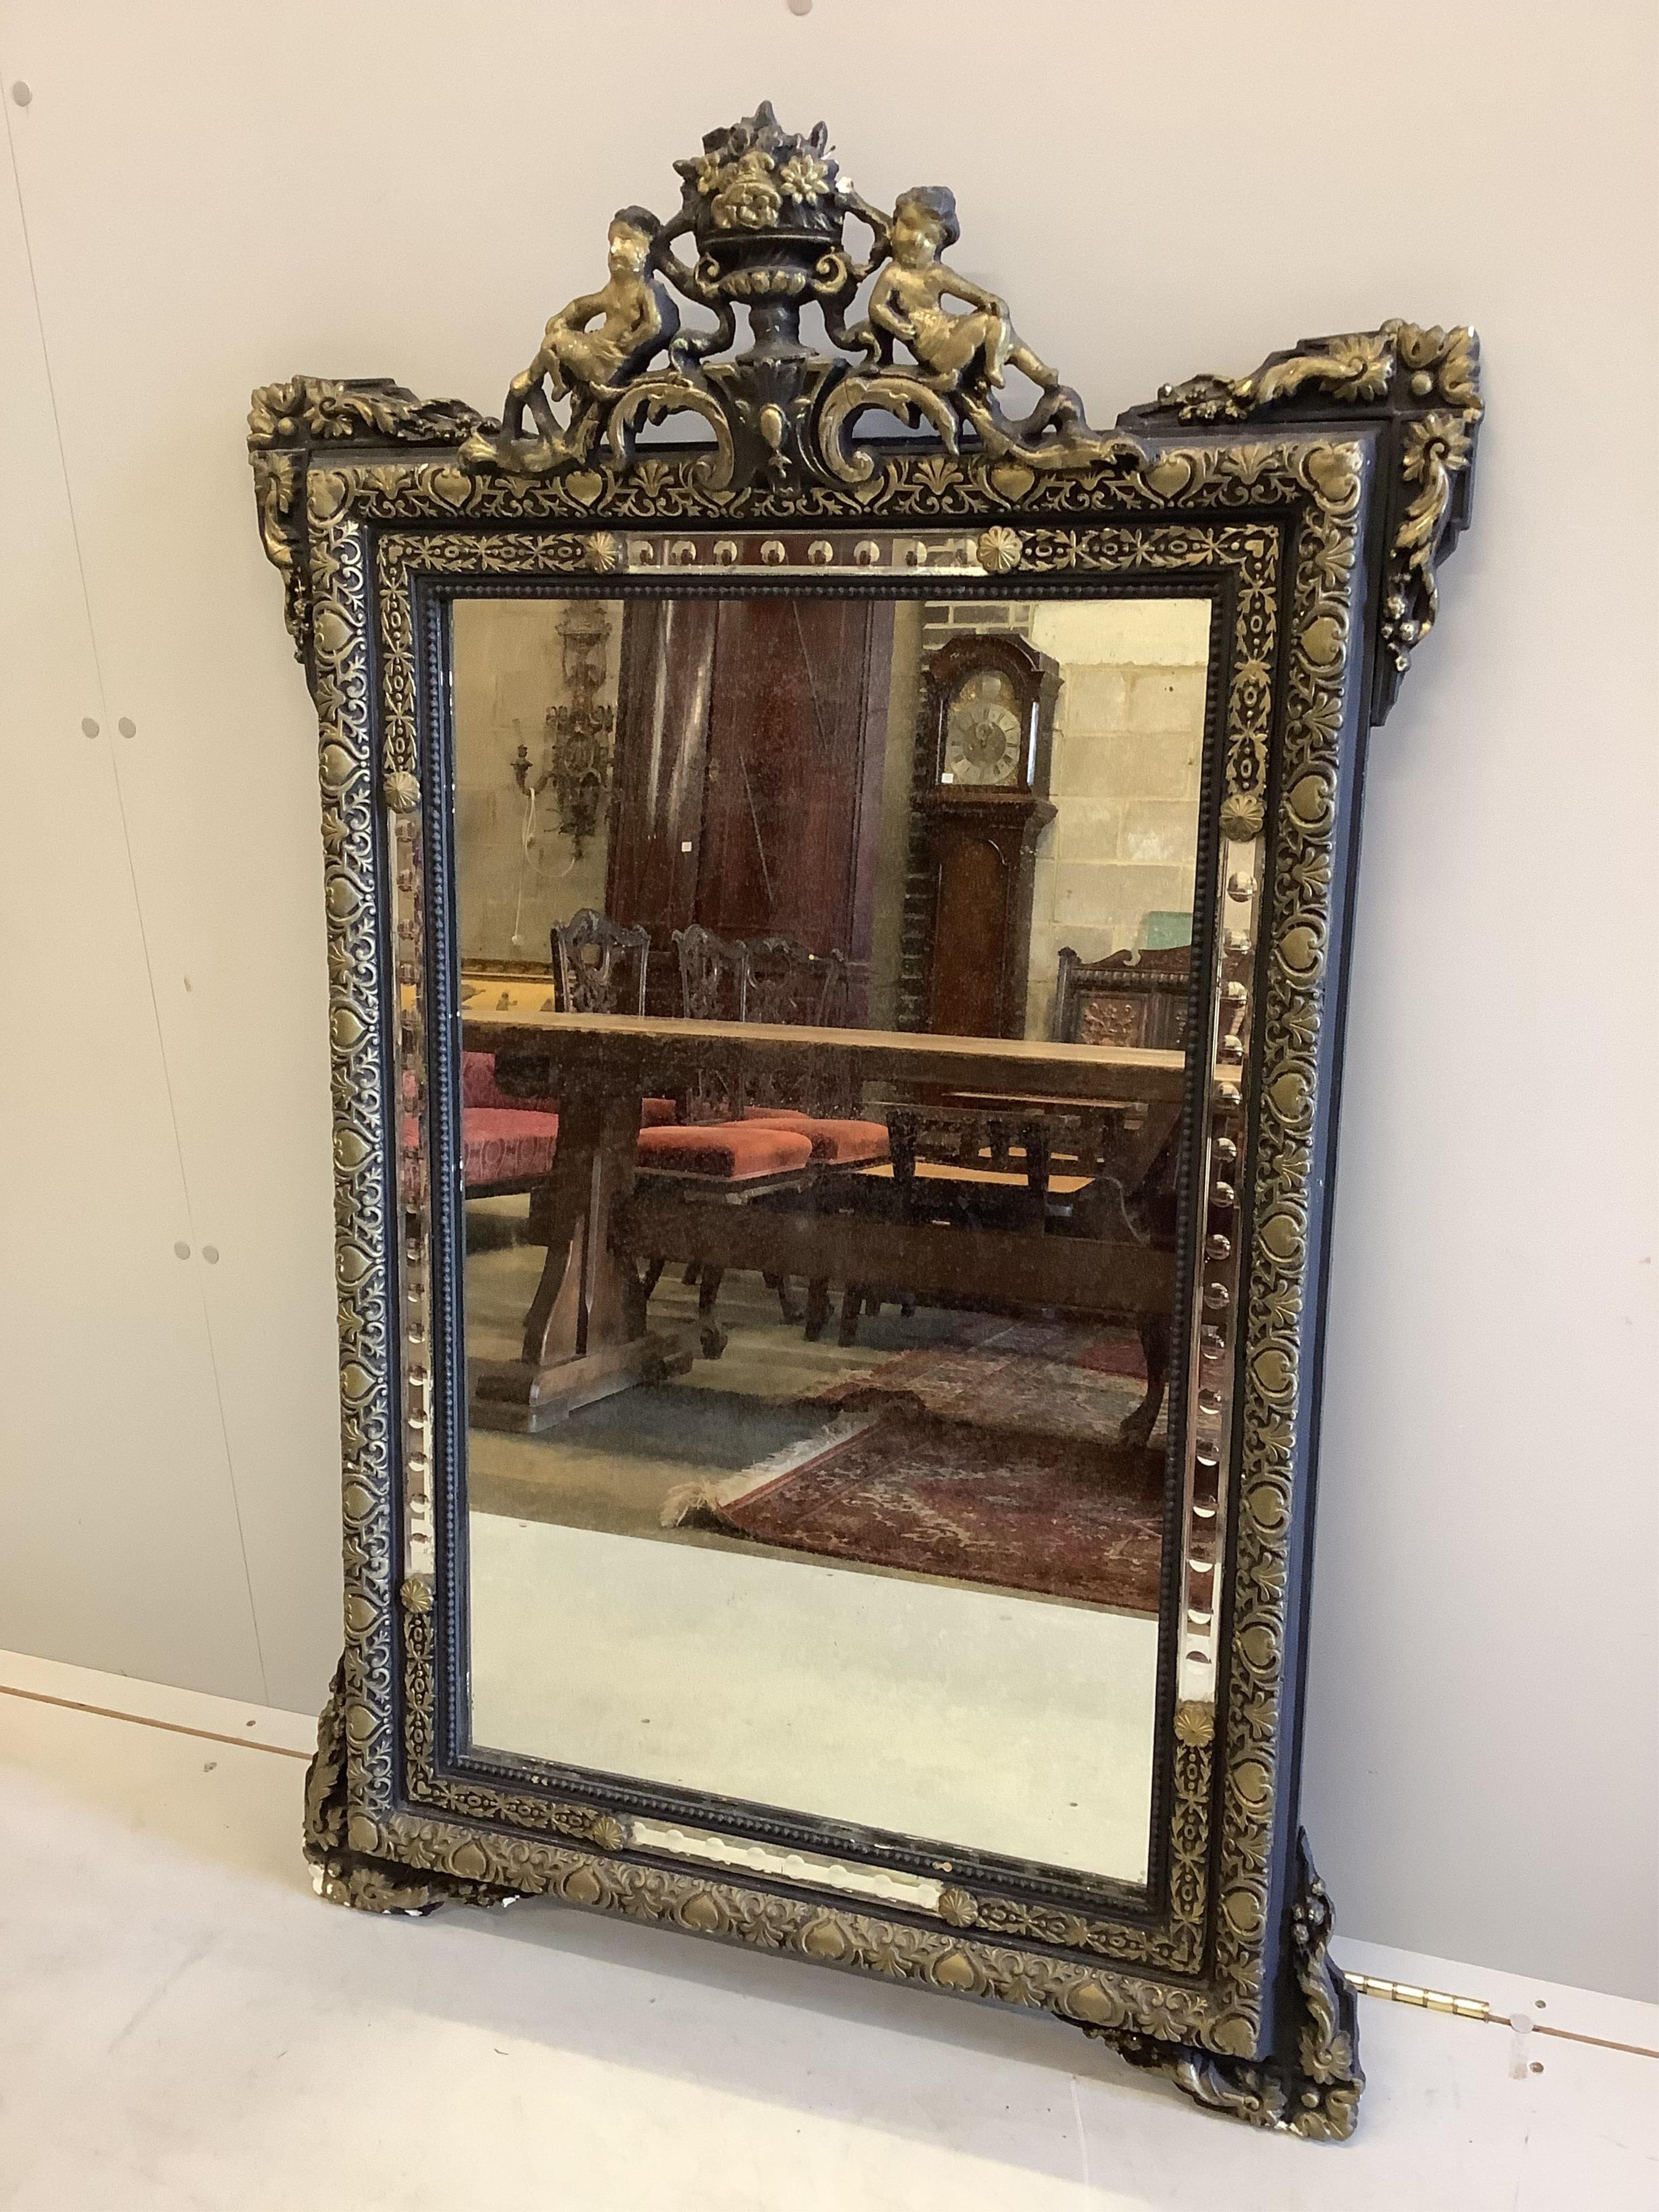 A French decorative wall mirror with cherub motifs, (later painted), width 81cm, height 127cm. Condition - poor